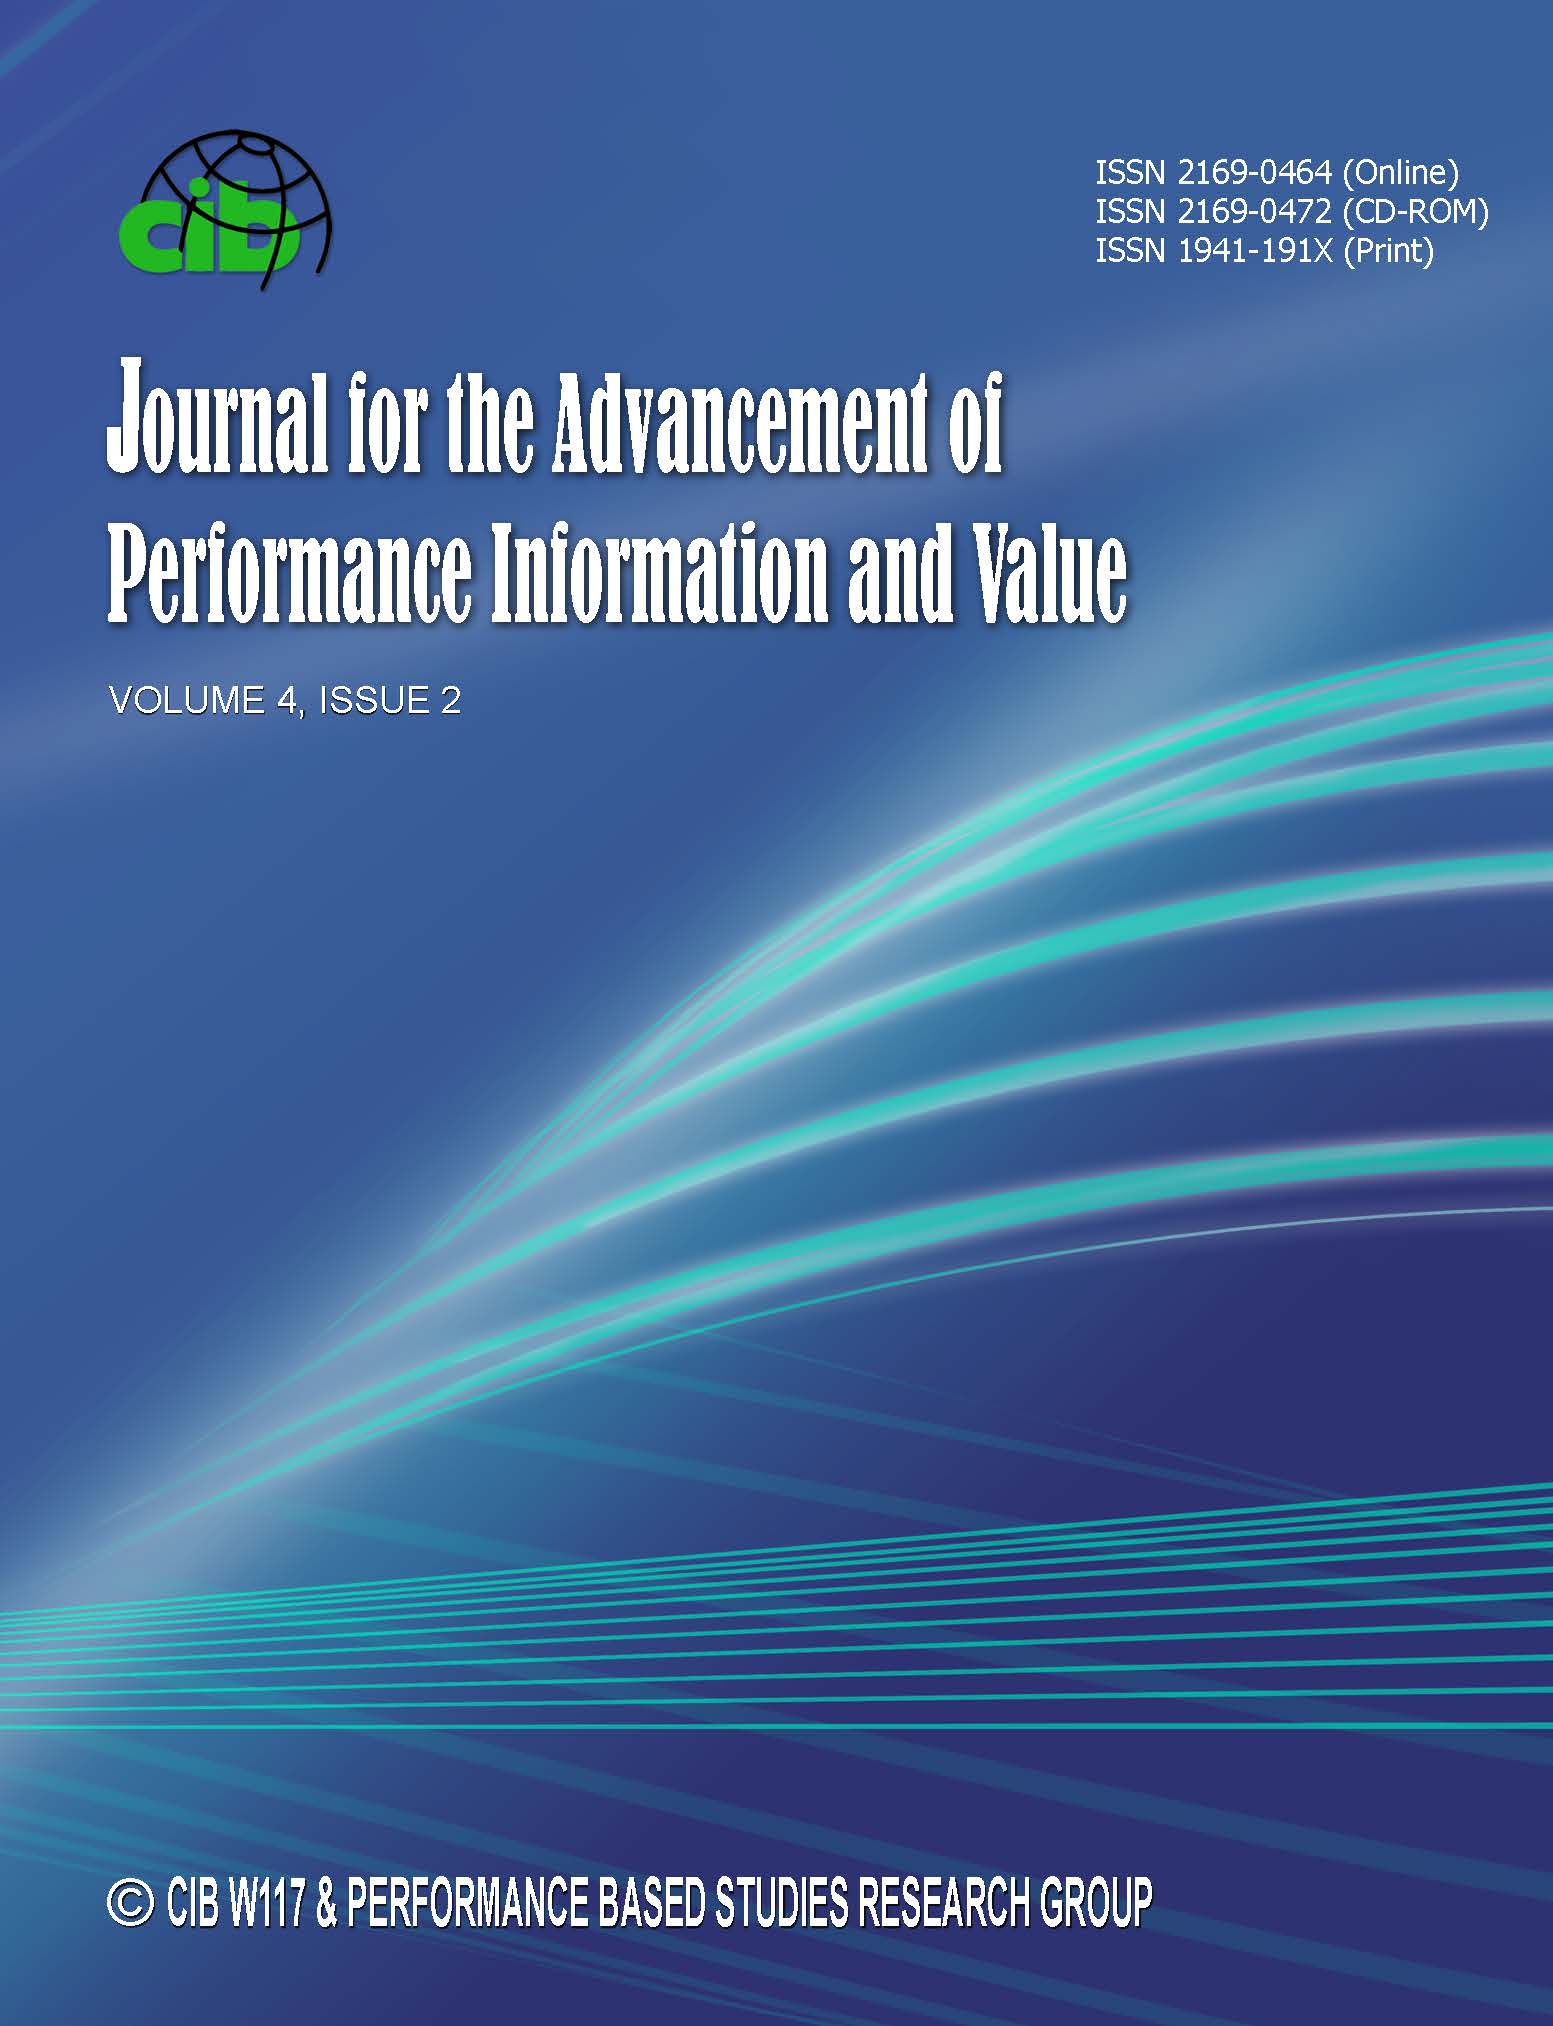 					View Vol. 4 No. 2 (2012): Journal for the Advancement of Performance Information and Value
				